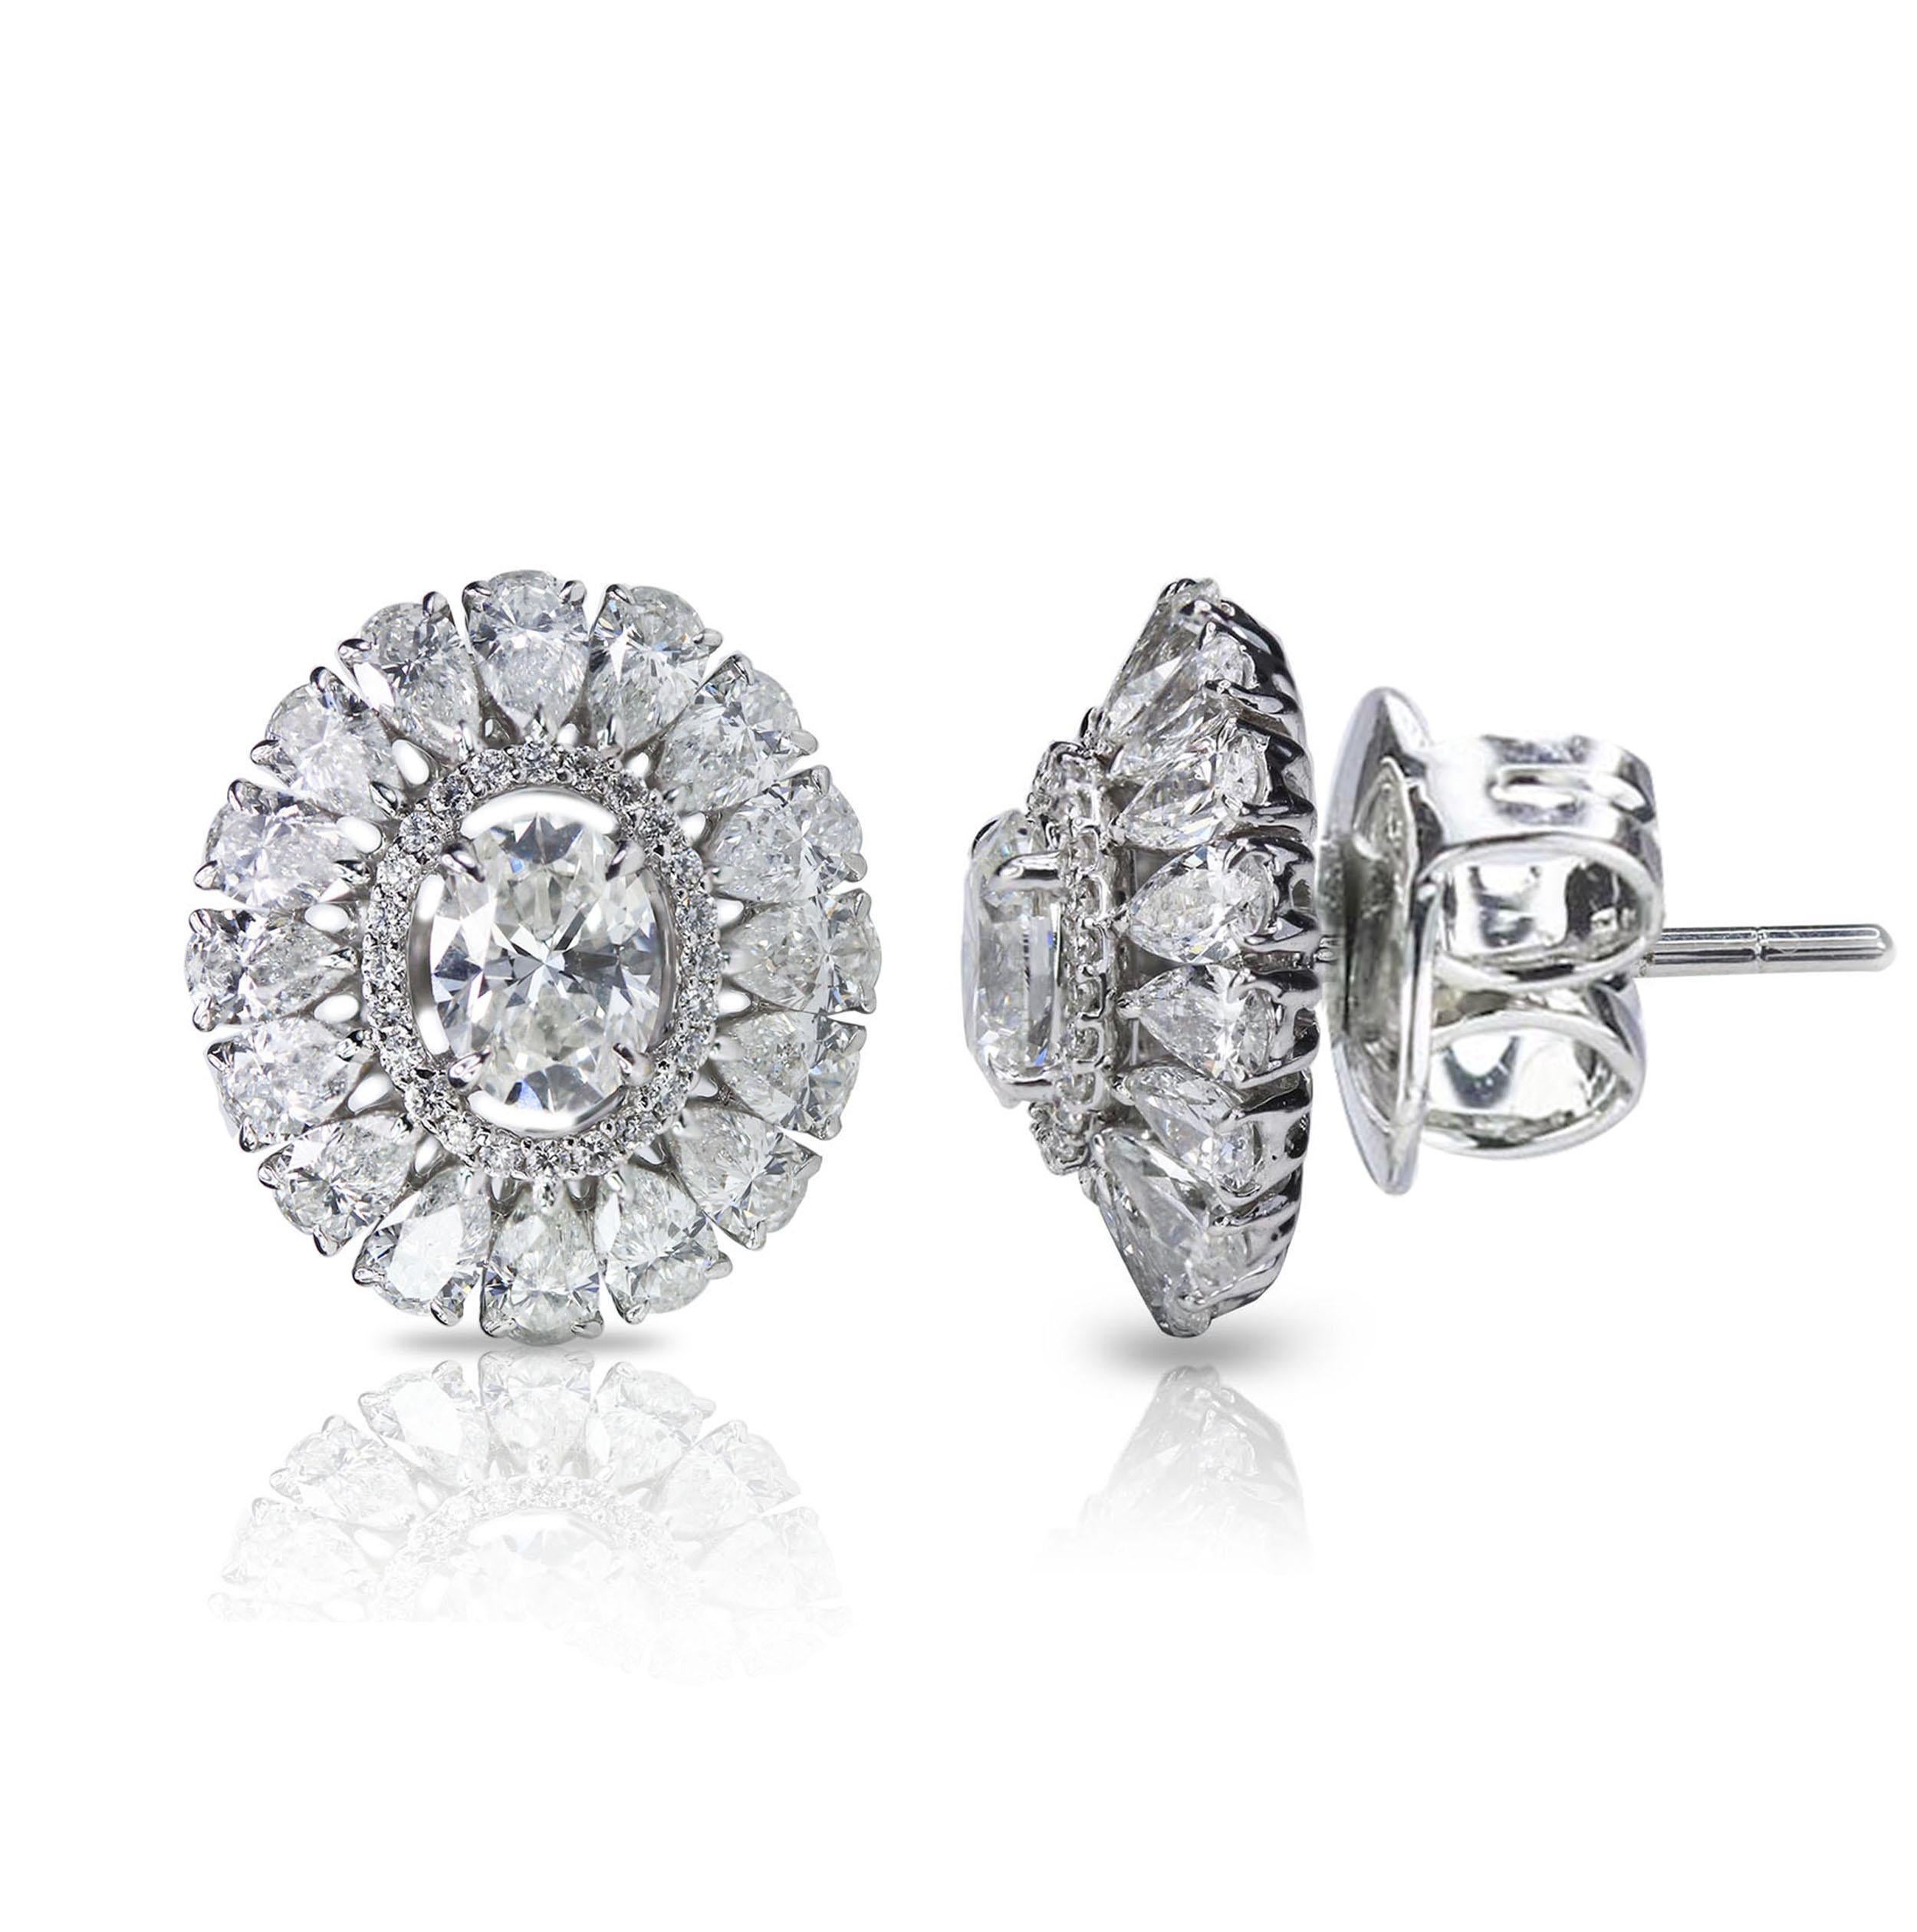 F-G/ VS-SI brilliant cut diamonds studs

Define elegance with this pair of 18K white gold and diamond stud earrings that command attention while being subtly refined in equal measures. The pair is studded with  F-G, VS-SI brilliant-cut diamonds in a